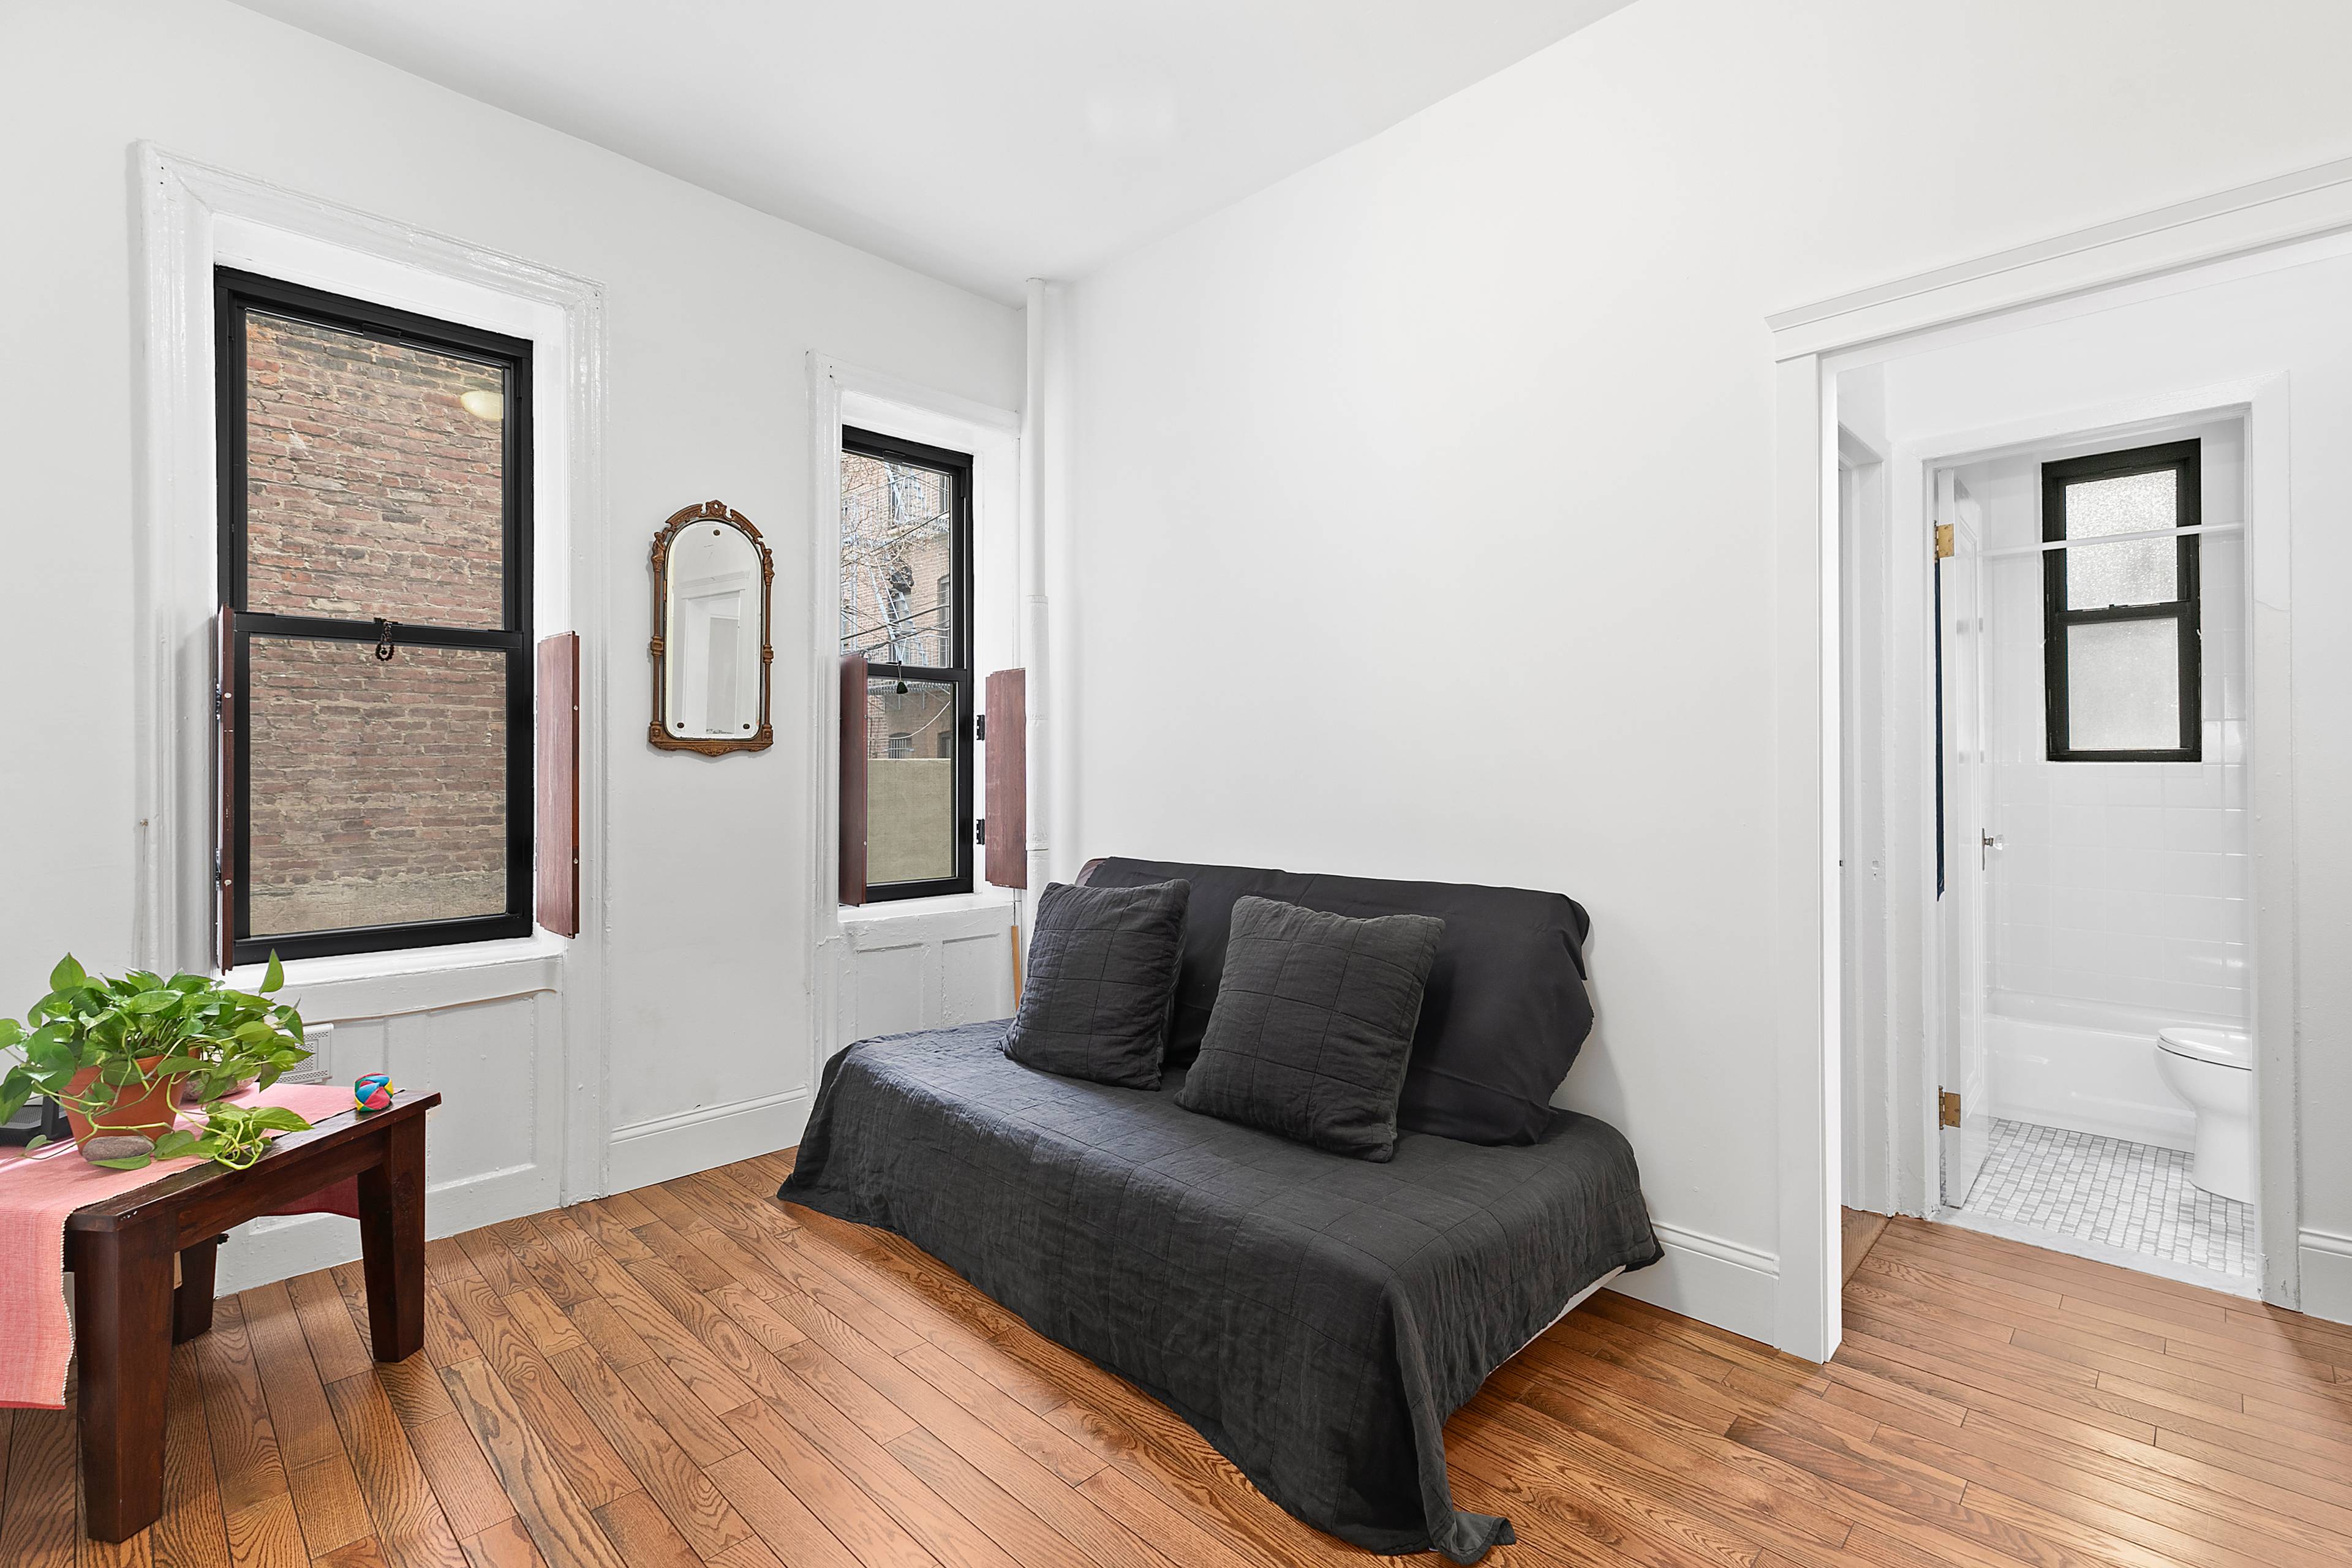 Welcome to 339 Bedford Avenue, a classic pre war HDFC co op in the center of the burgeoning South Williamsburg neighborhood.